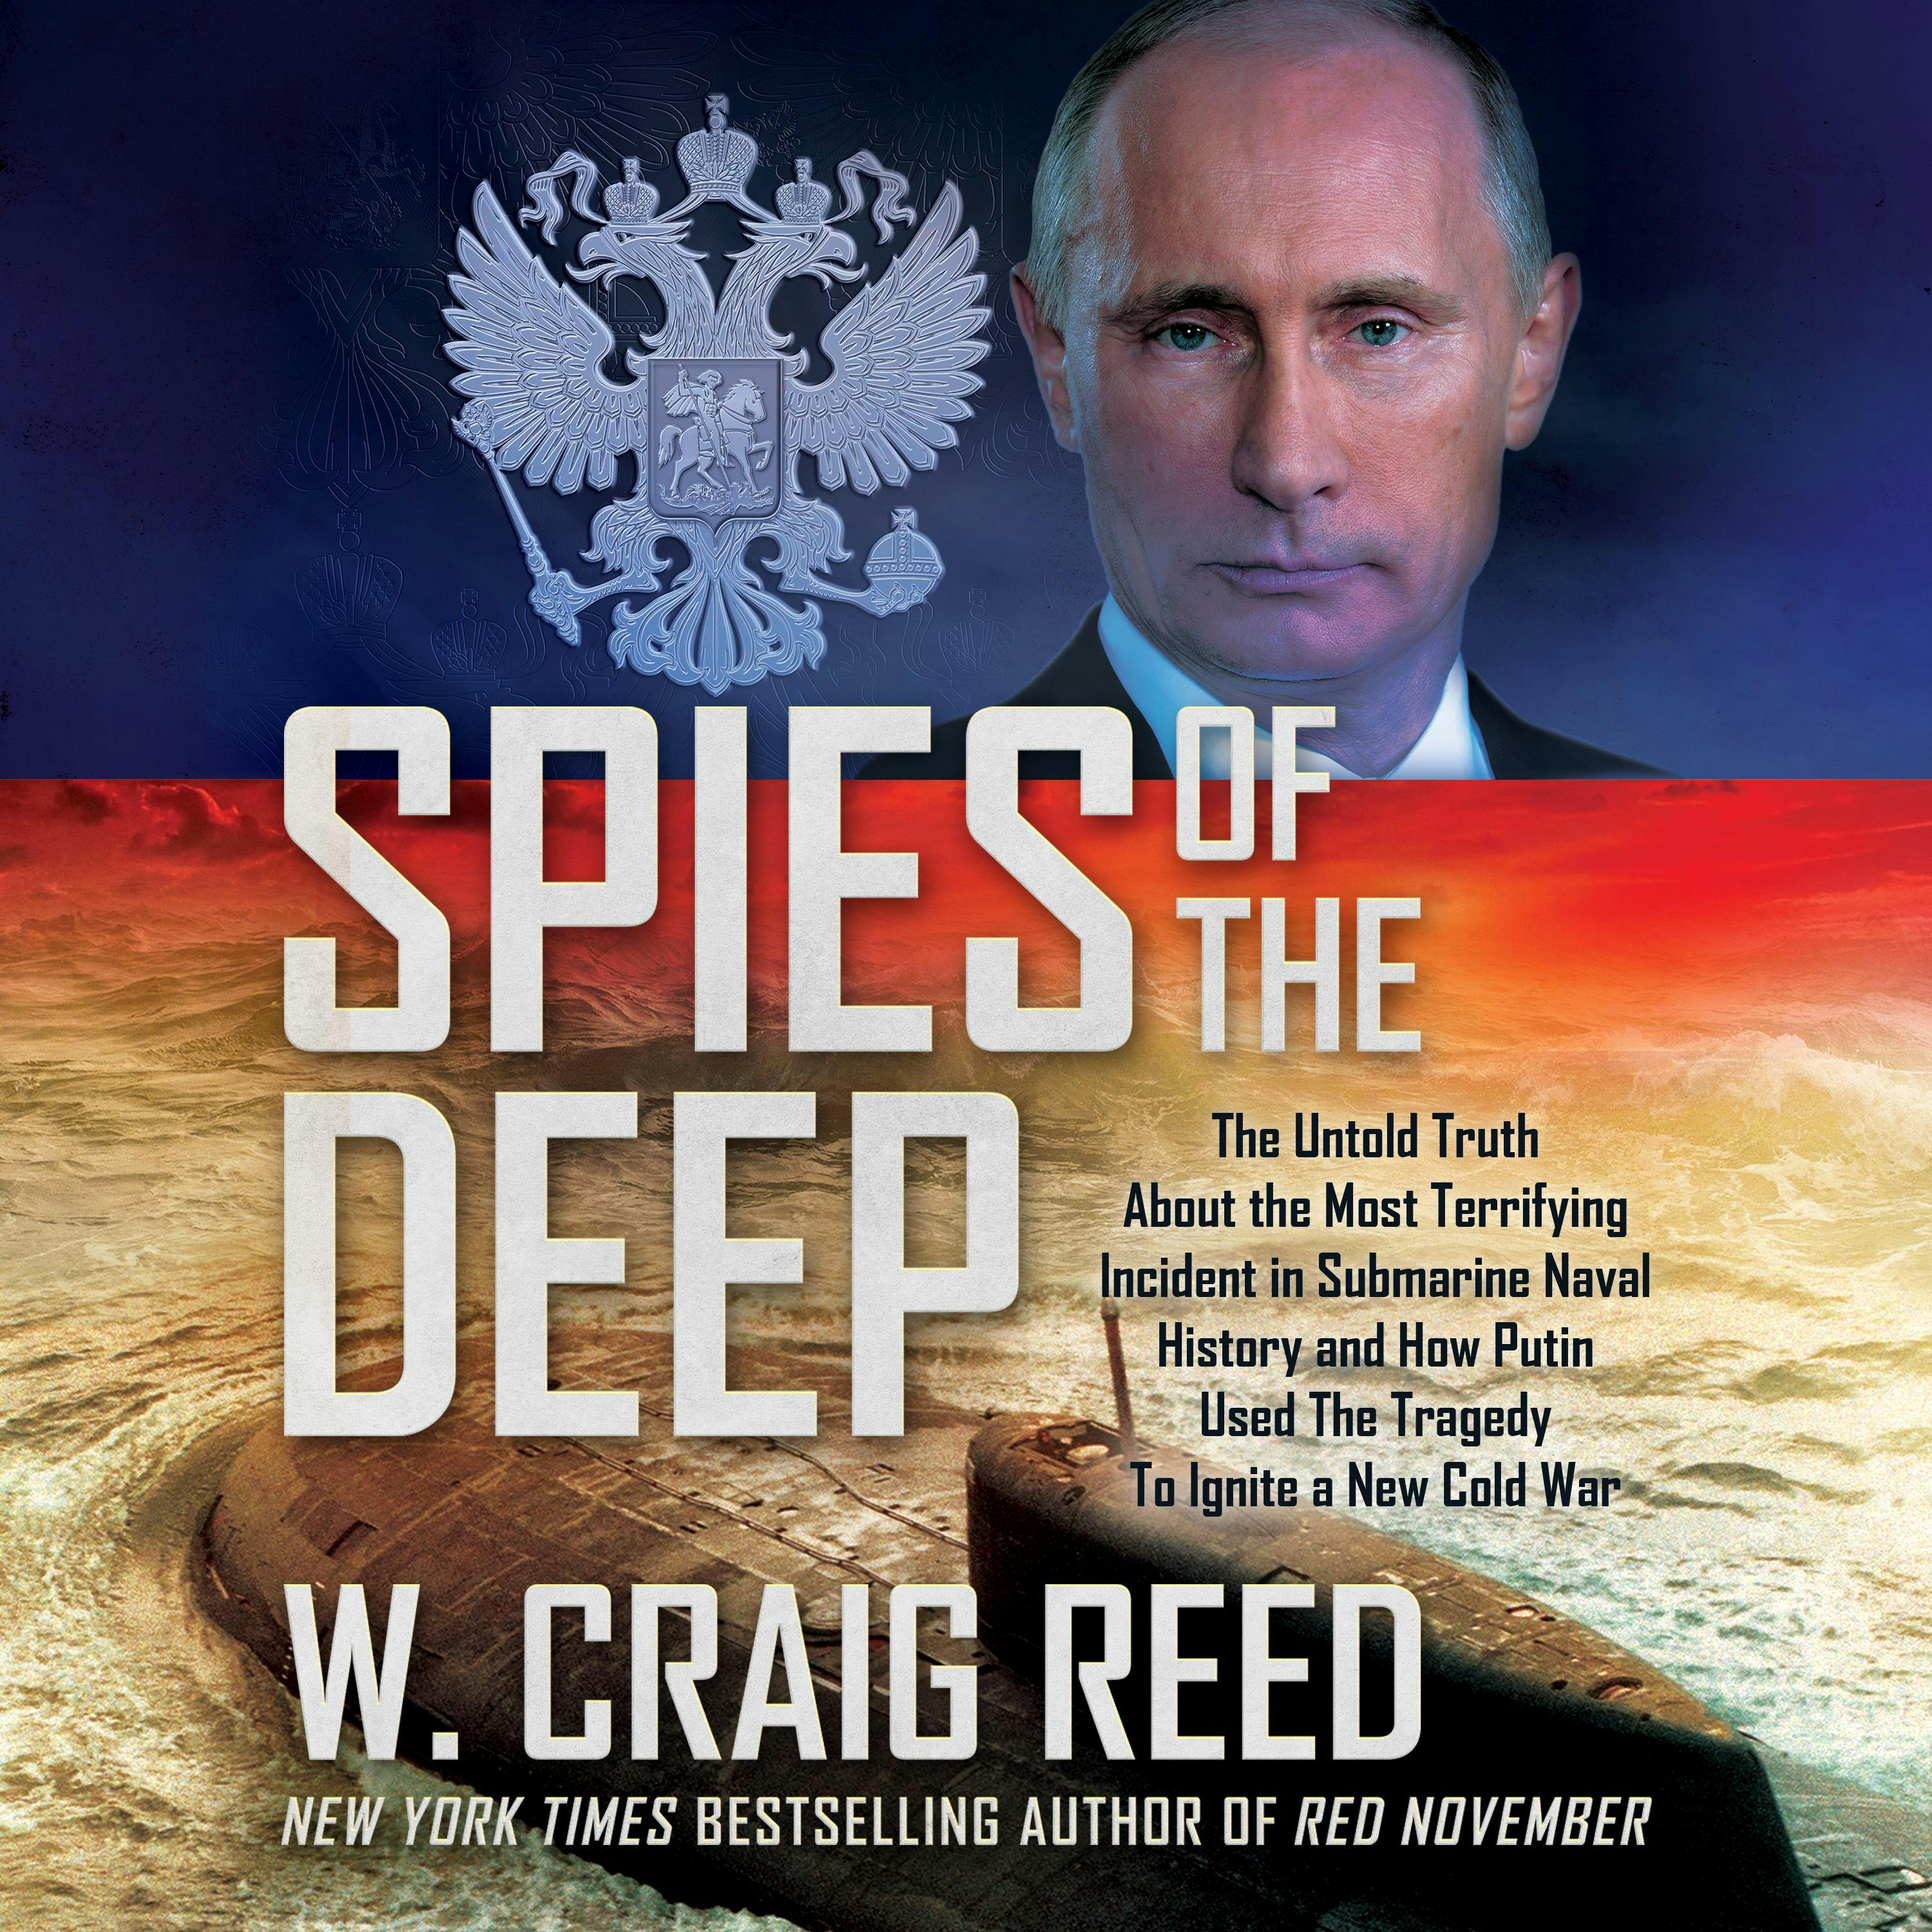 Spies of the Deep: The Untold Truth About the Most Terrifying Incident in Submarine Naval History and How Putin Used The Tragedy To Ignite a New Cold War - W. Craig Reed